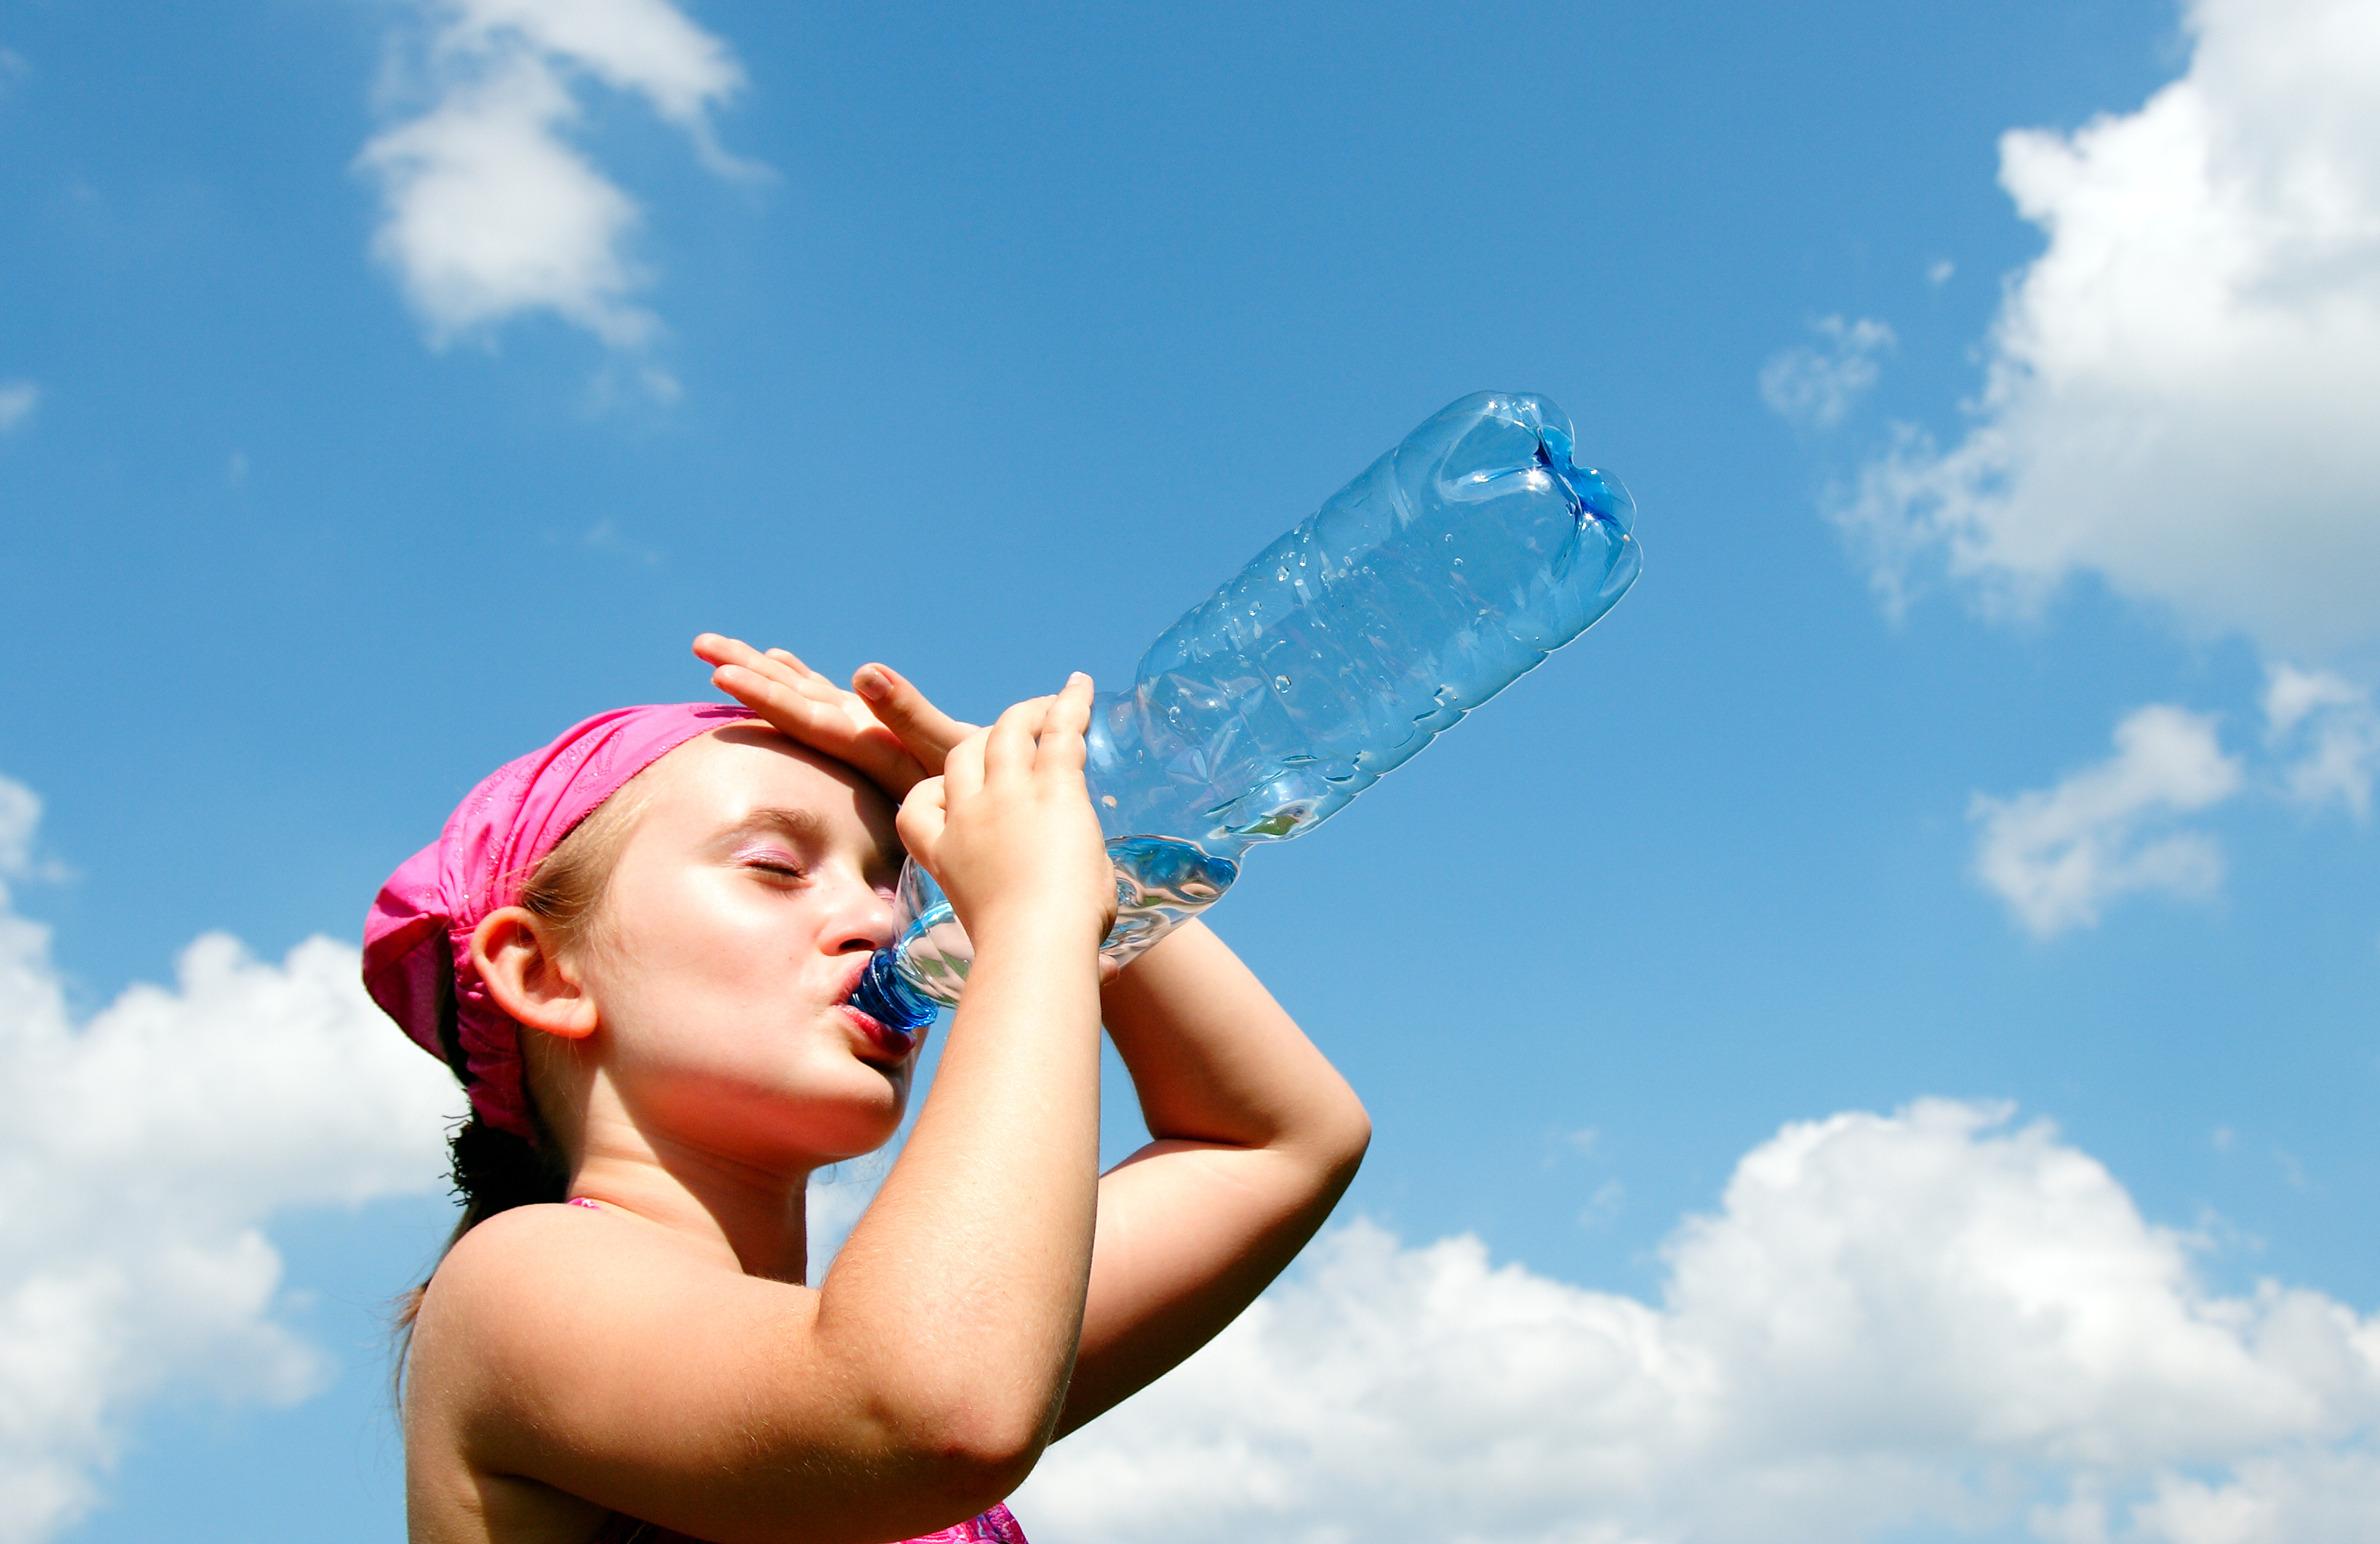 A child drinking water in front of a blue sky with white clouds